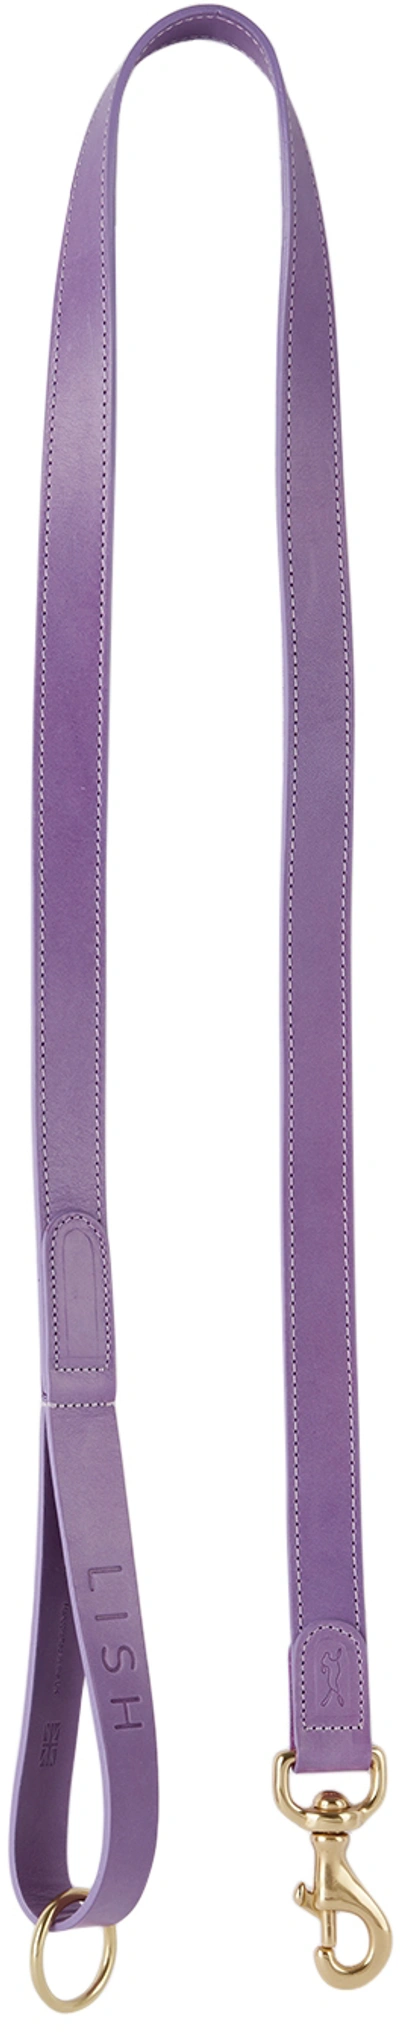 Shop Lish Purple Large Coopers Leash In Violet